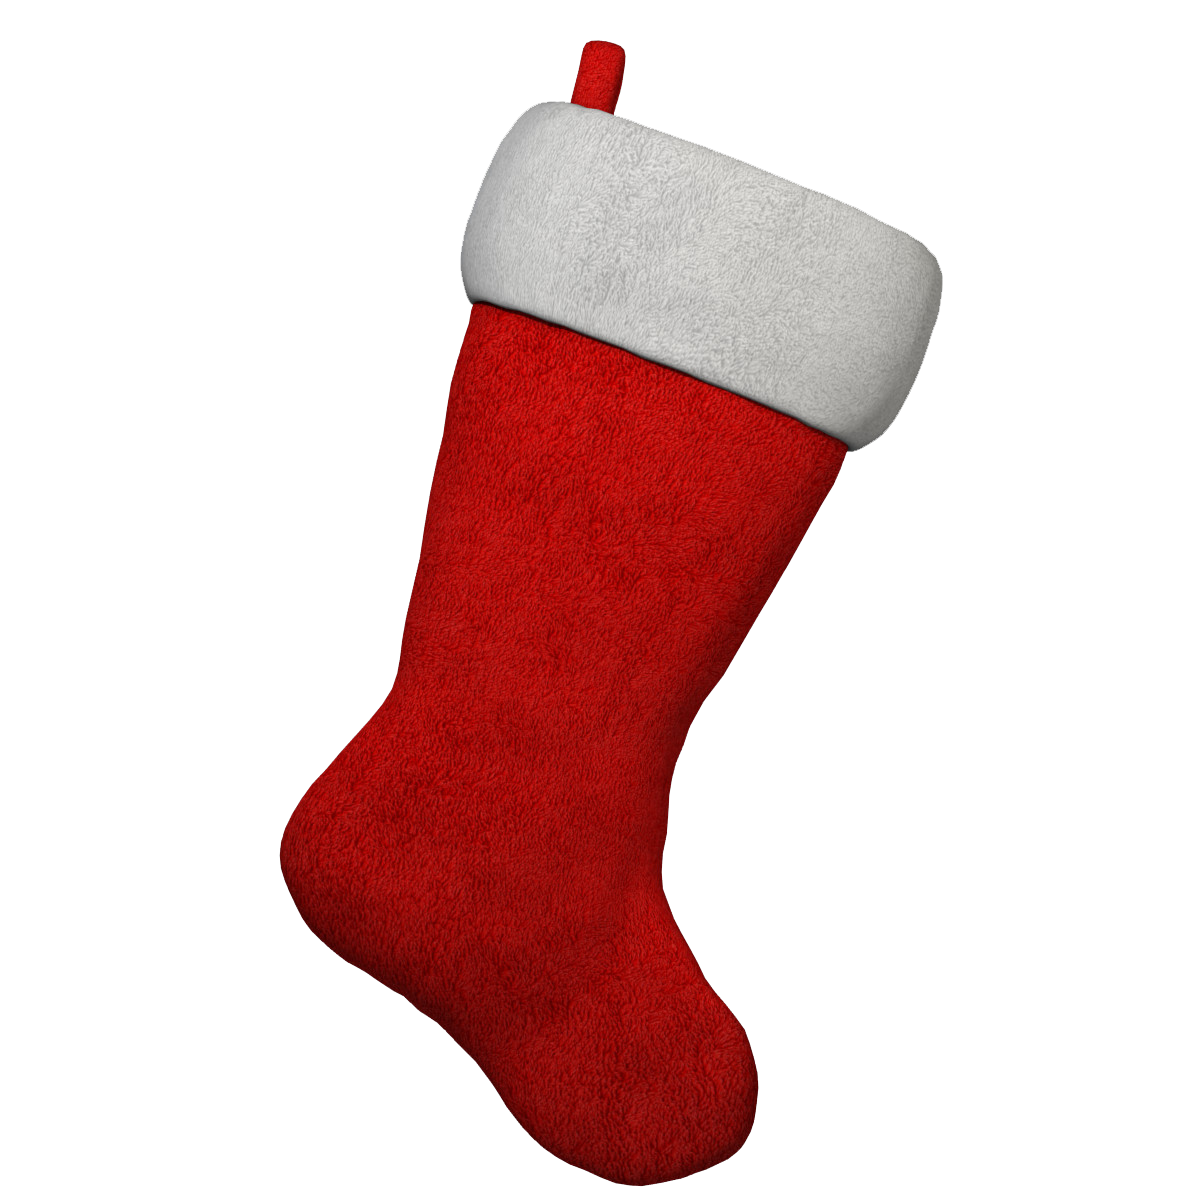 Christmas Stocking PNG Free Download